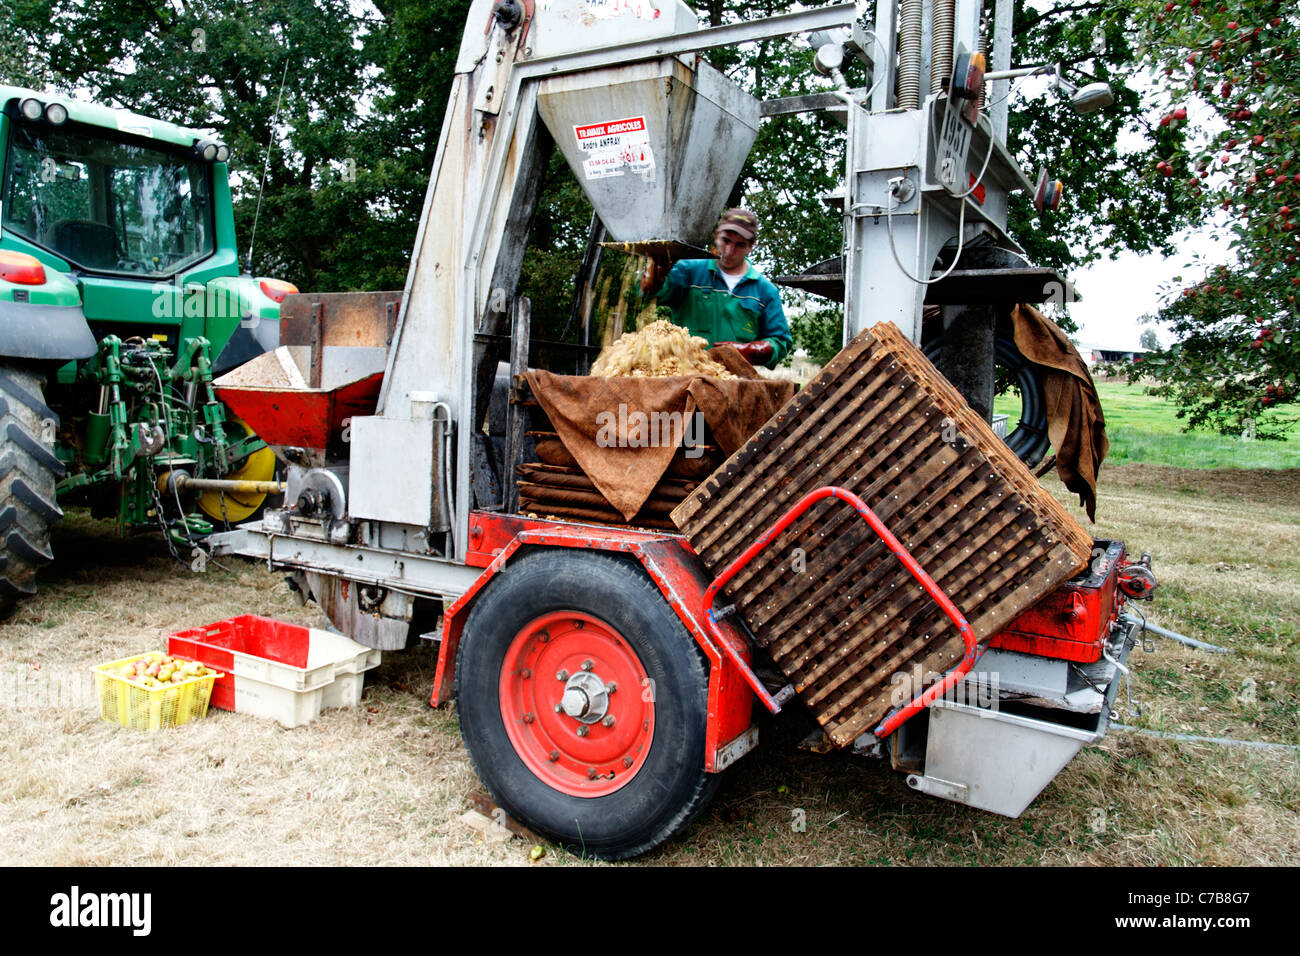 Pressing apples to make cider, hydraulic press (Normandy, France). Stock Photo